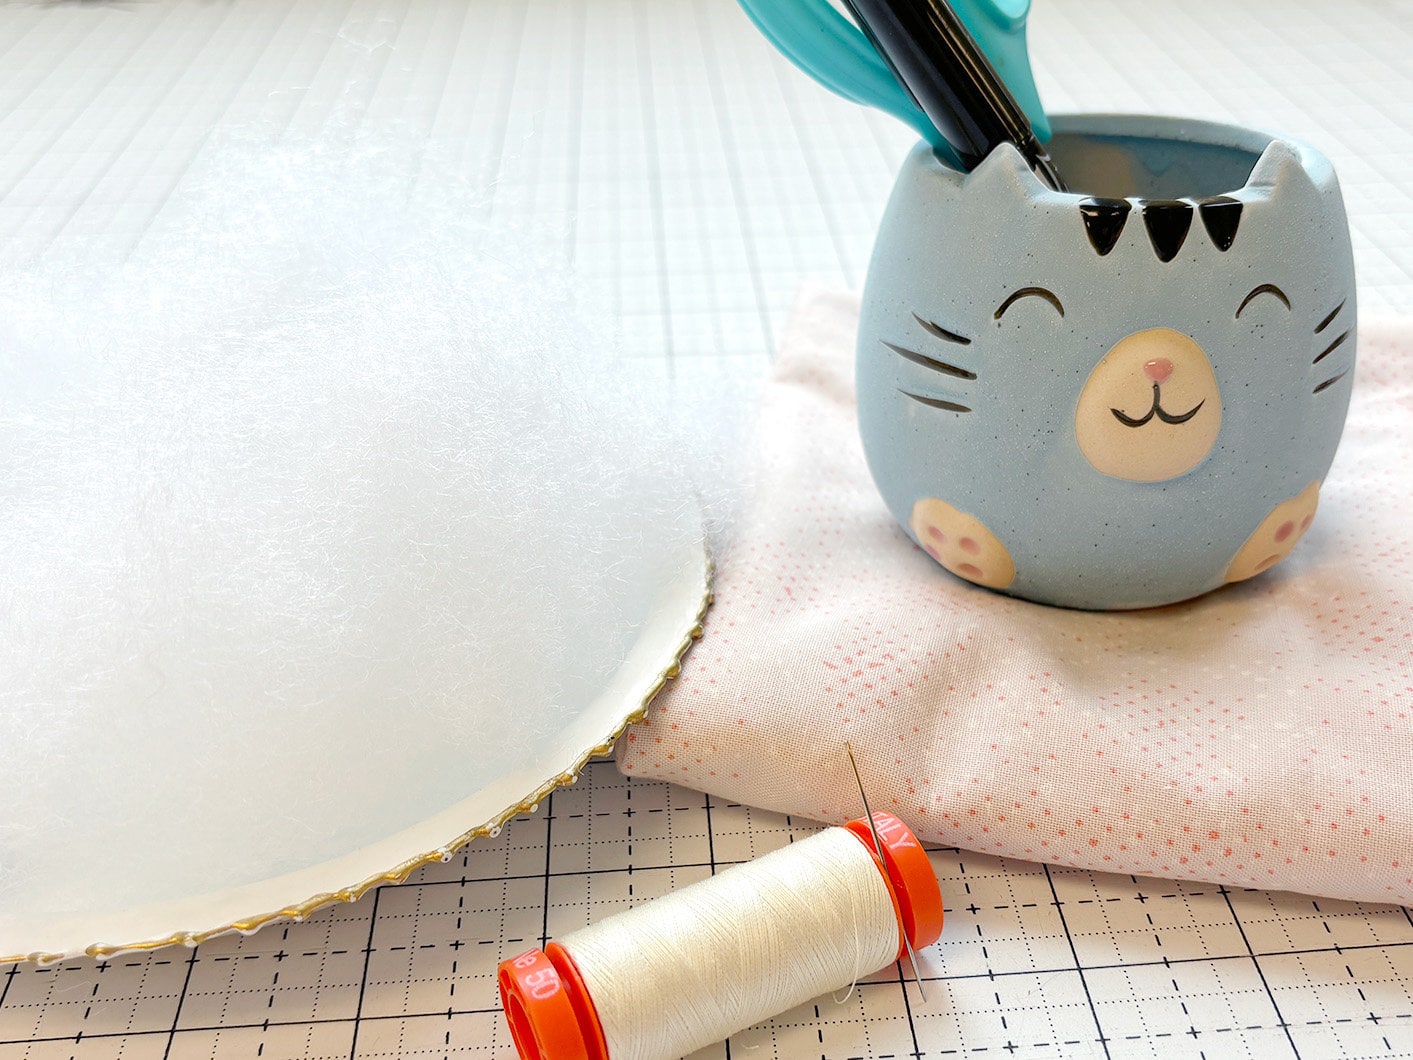 My mummy's sewing needle case – Love, Lucie